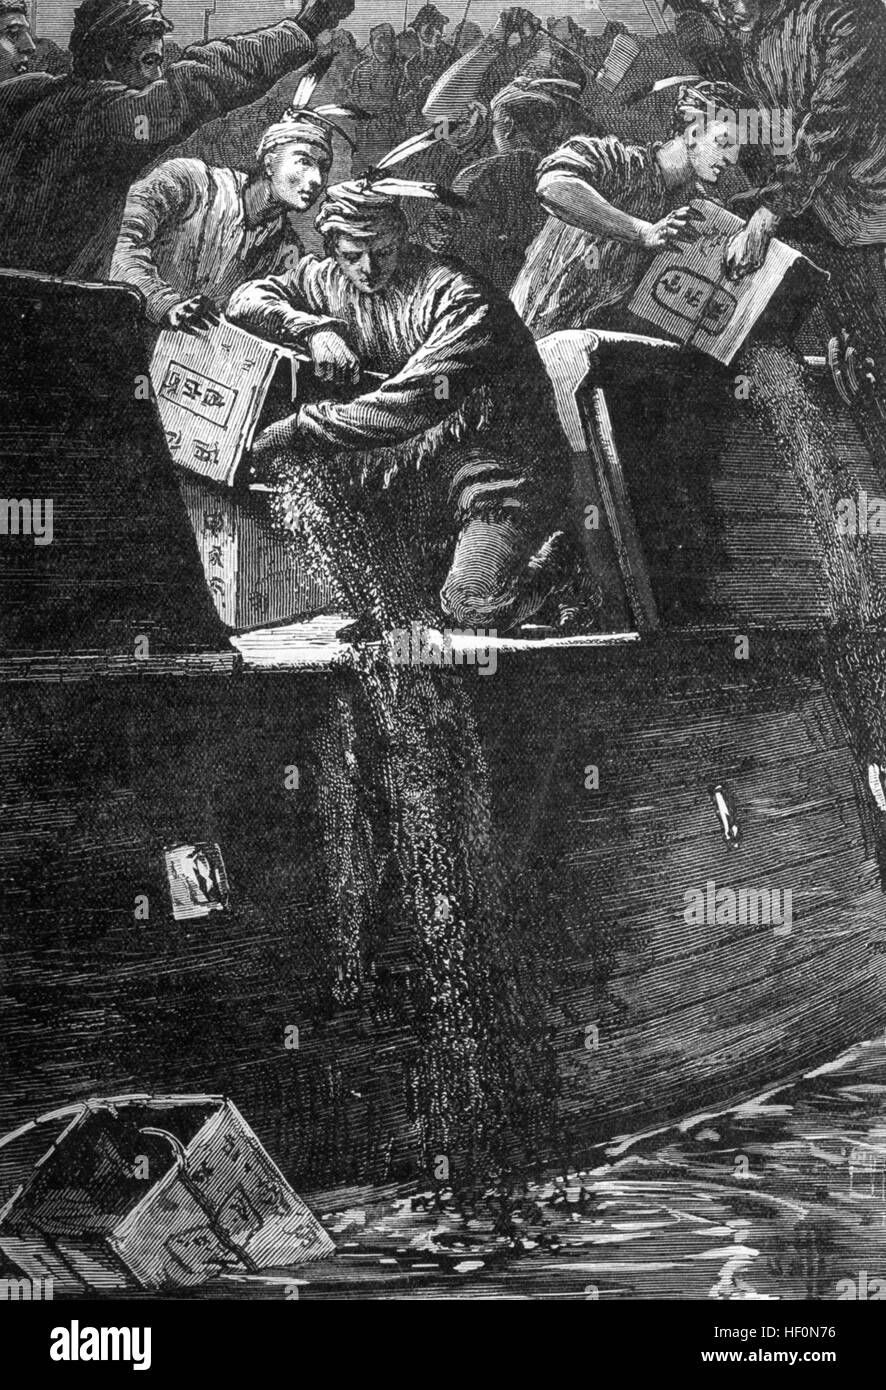 BOSTON TEA PARTY 16 December 1773. Demonstrators tipping chest of tea from East India Company ships into Boston harbour in a 19th century engraving Stock Photo